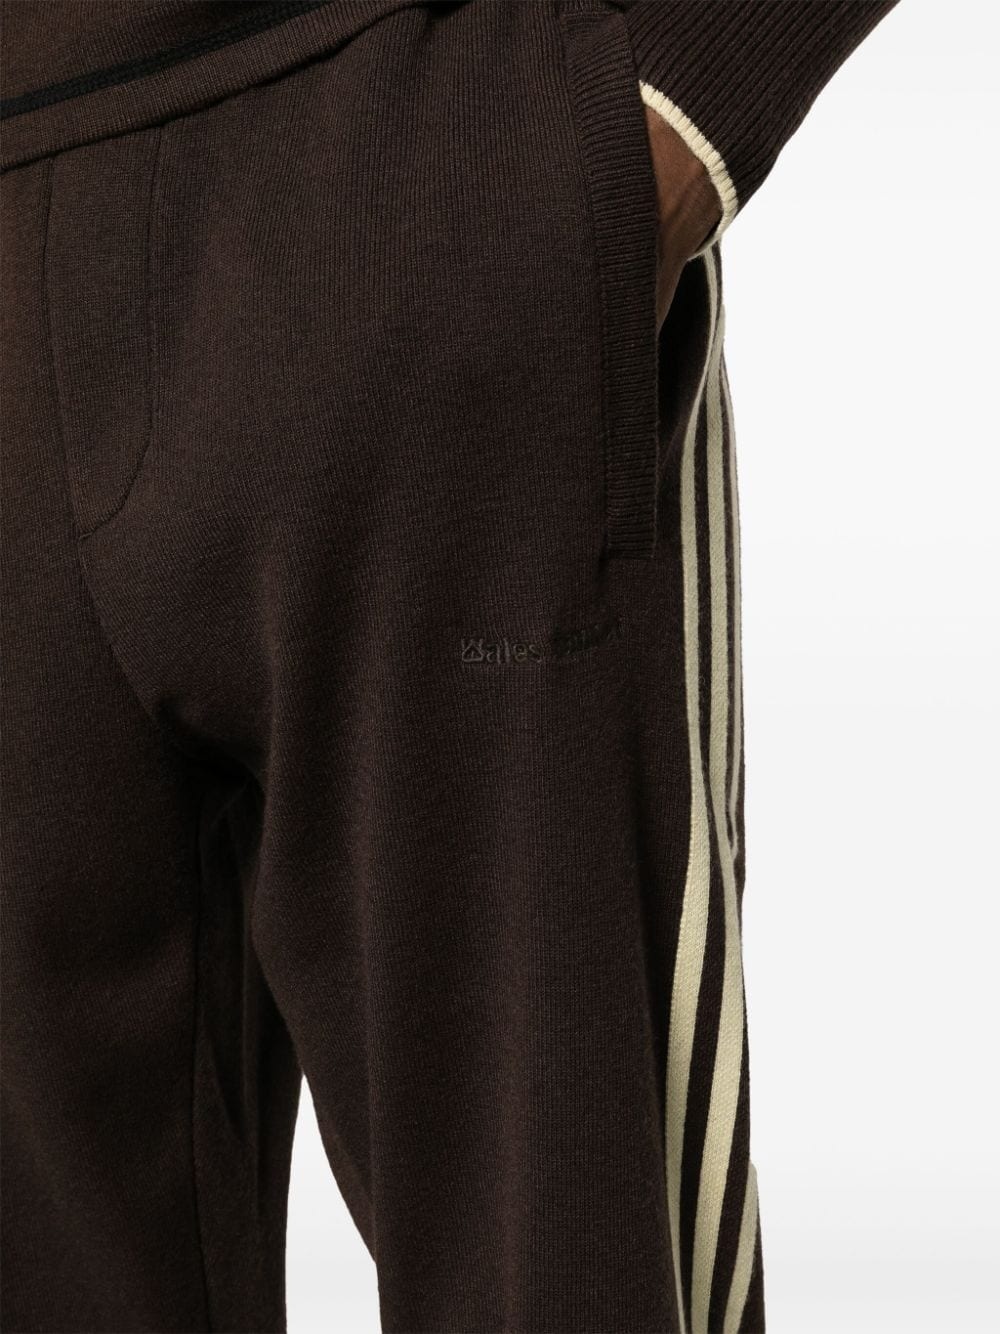 x Wales Bonner knitted track pants - 6